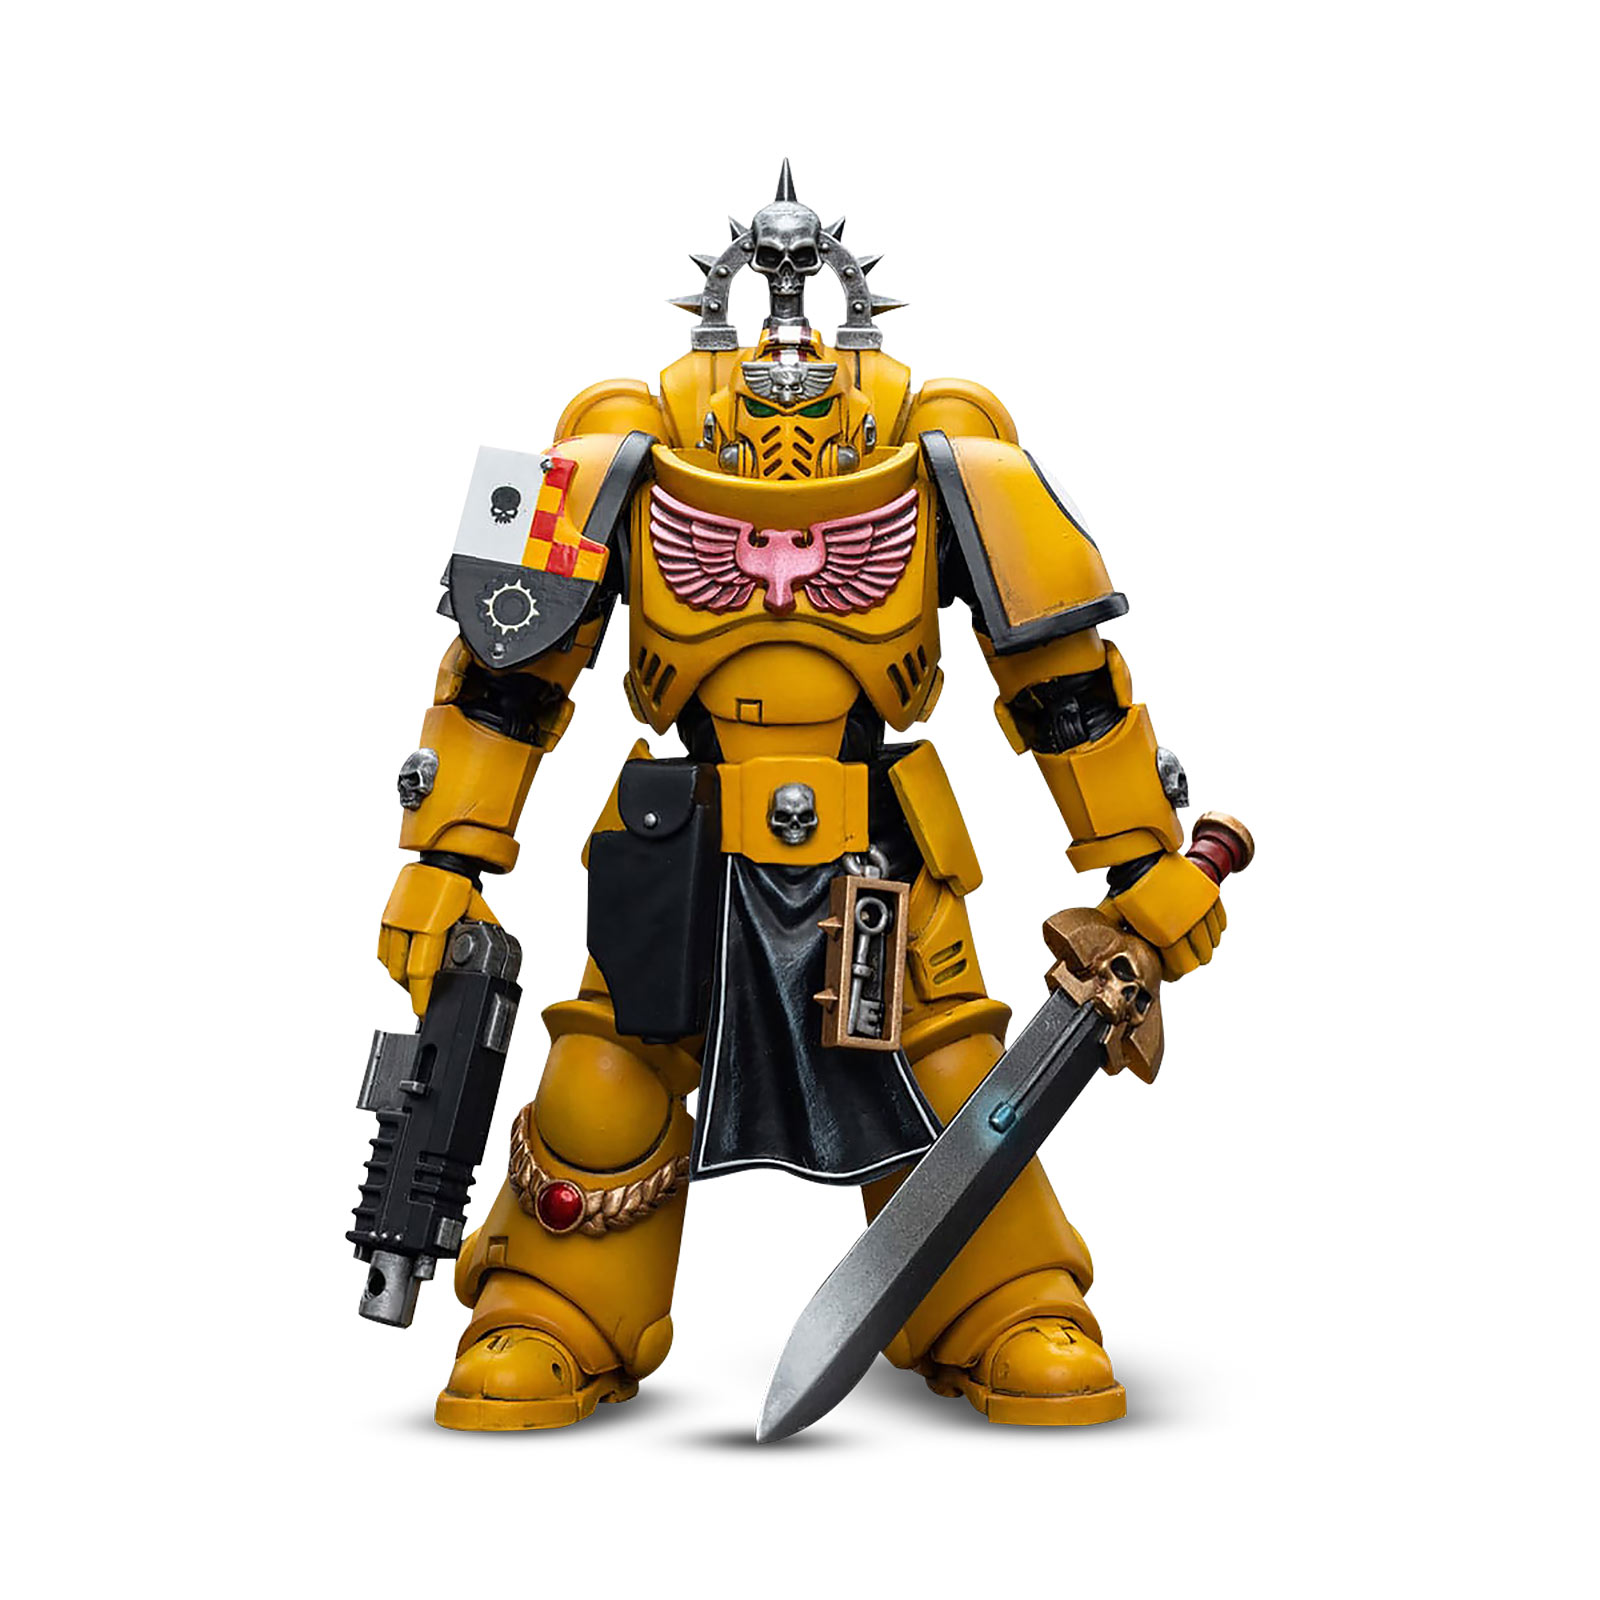 Warhammer 40k - Imperial Fists Lieutenant with Power Sword Action Figure